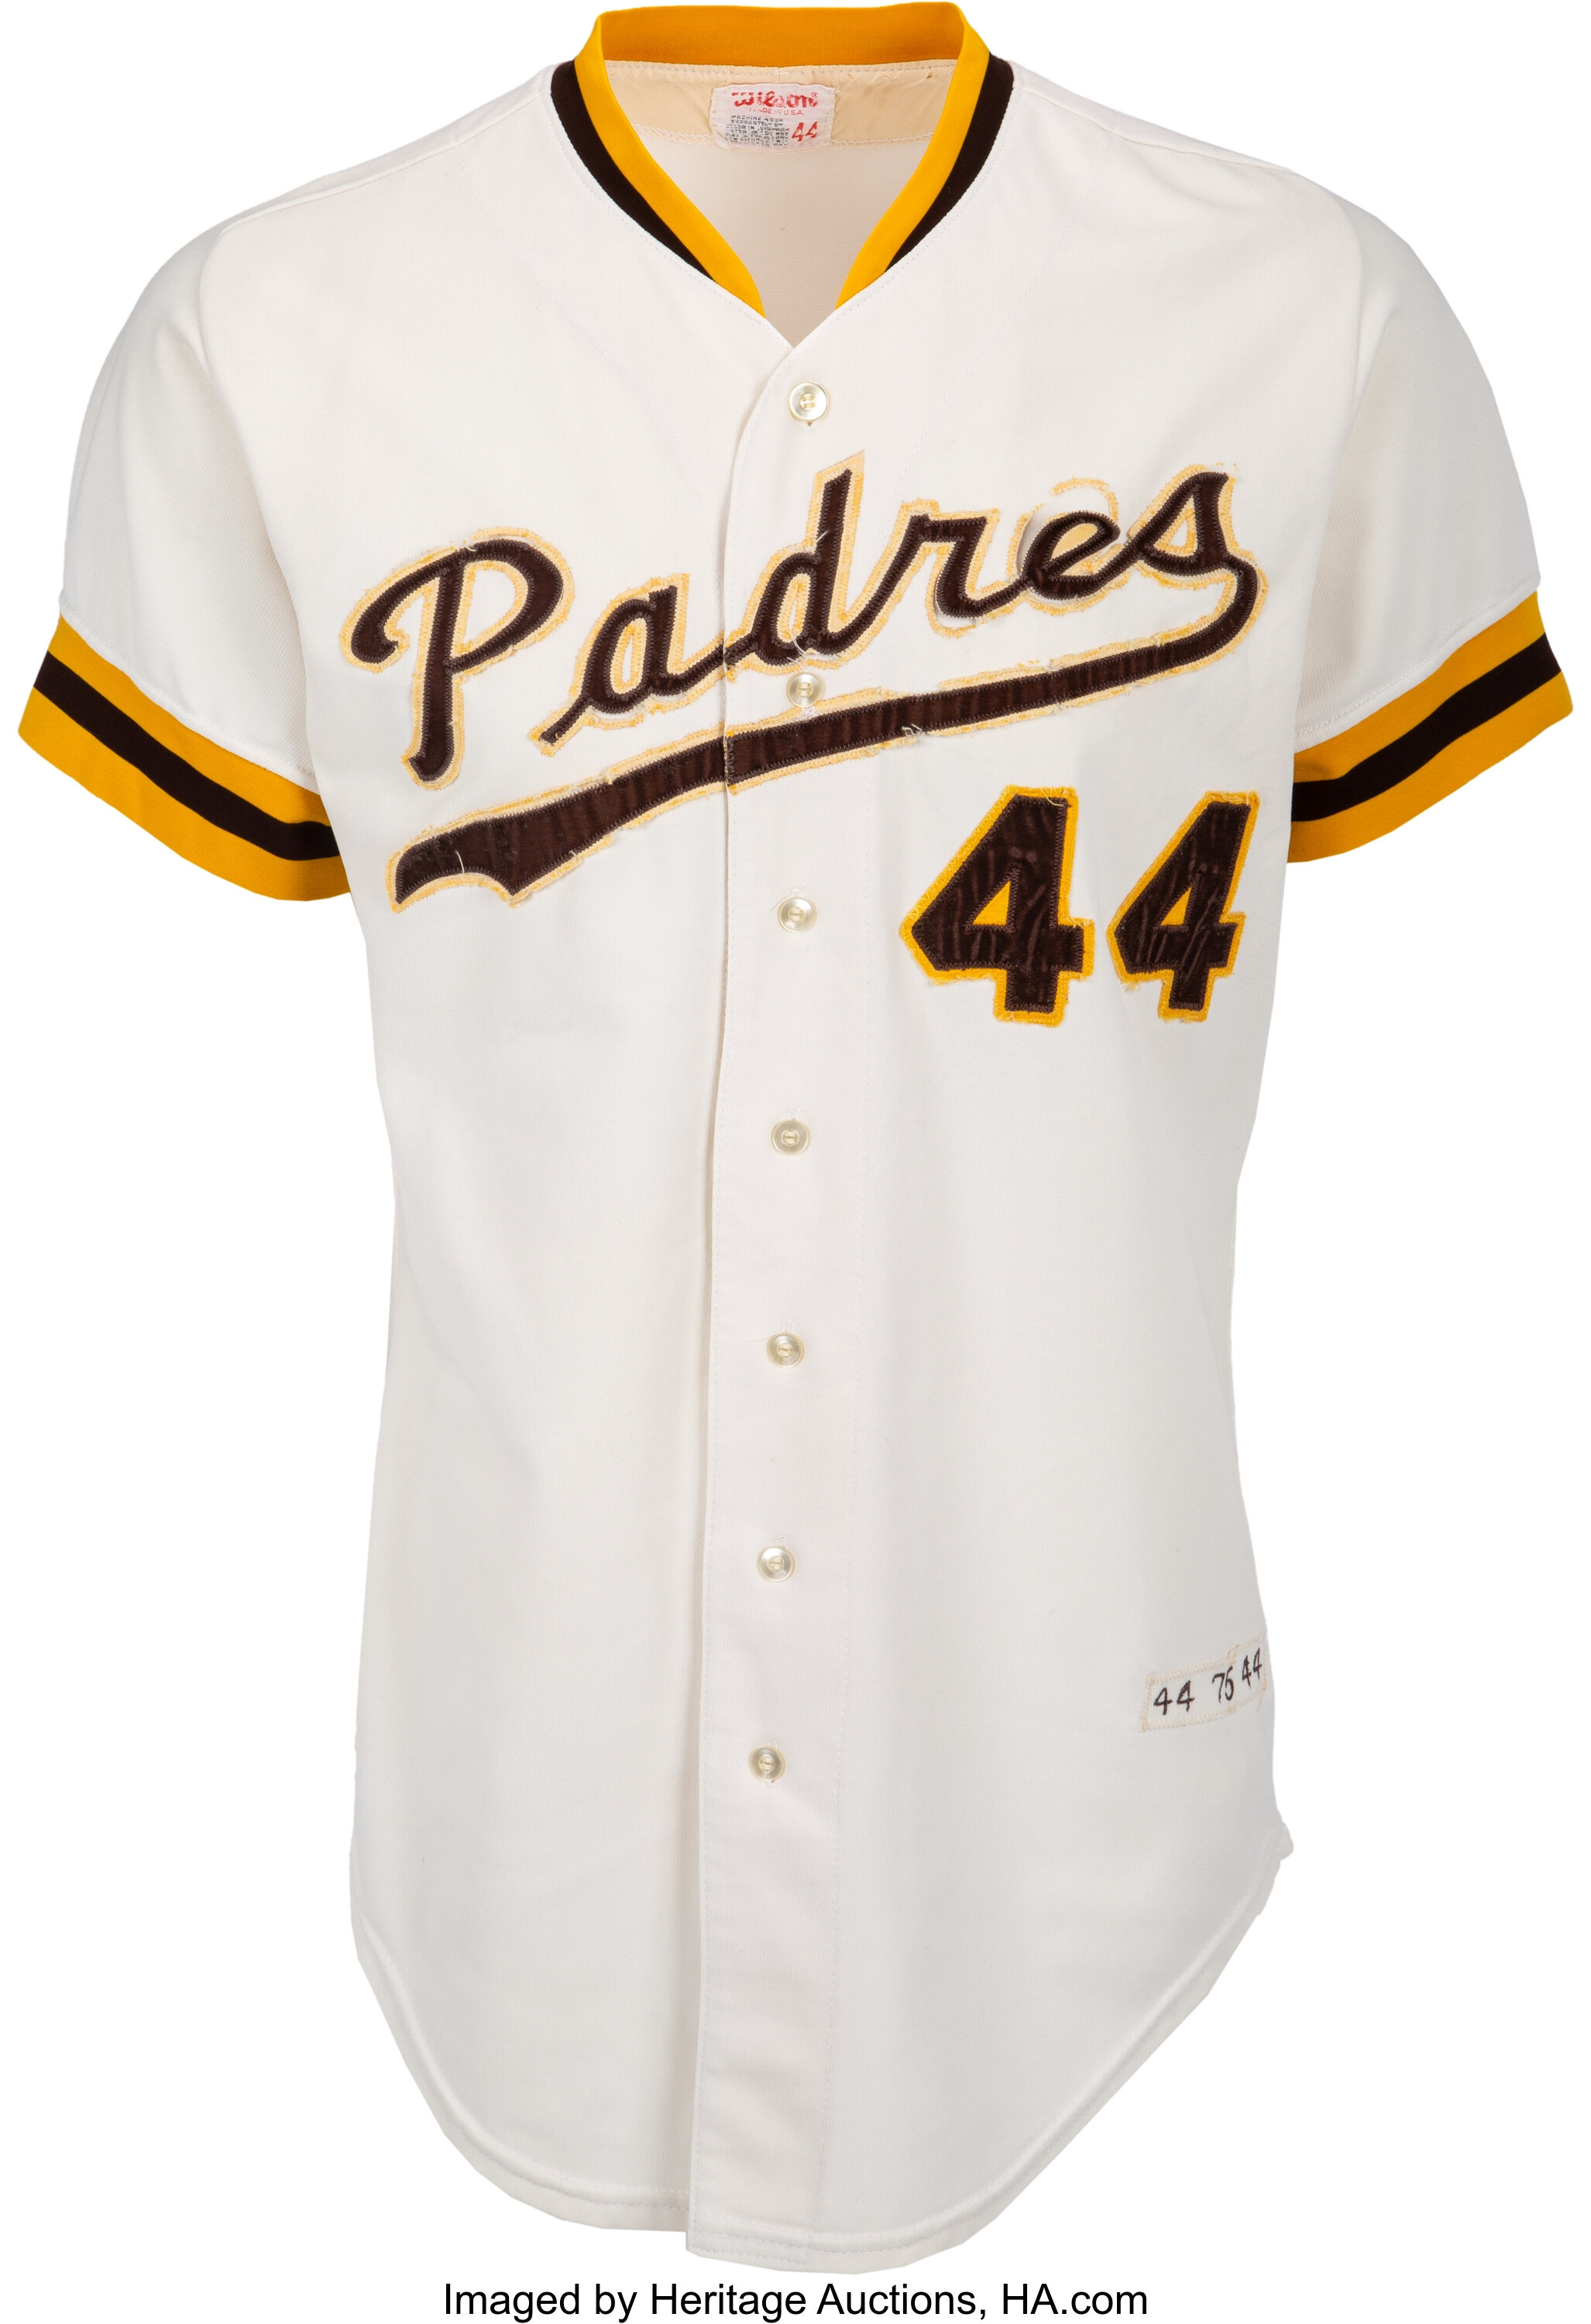 Check out this prototype jersey the Padres almost wore in the